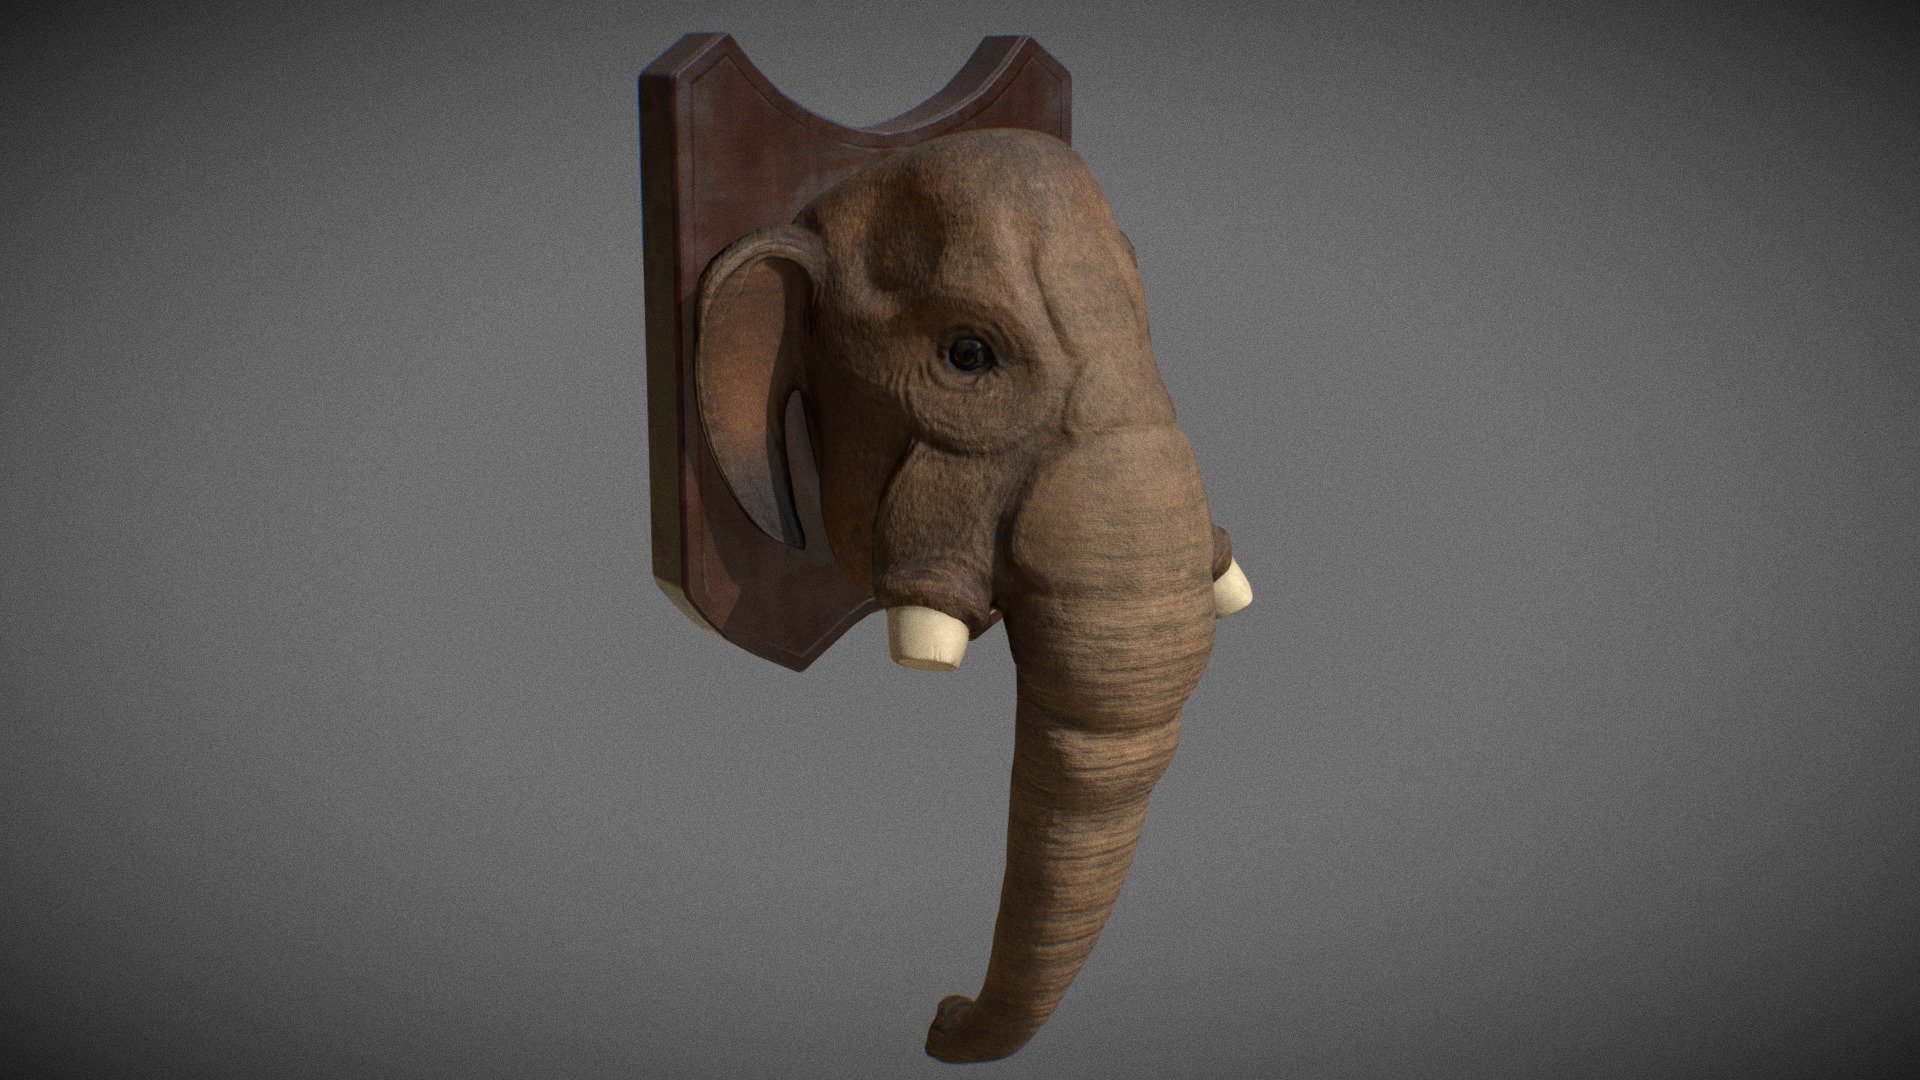 Low-poly PBR Mammoth Elephant Head model intended for game/realtime/background use.






Model was not intended for subdivision

Using Weighted Normal

Real World Scale Measurements

No special plug-ins necessary to use this product 

Quad/Tris only polygon - 5593 count 

Texel density is 59.35 for 4k UV-maps.



Model is included in 4 file formats (Include only geometry with uvs, and texture need add manually)




Maya 2019 

FBX 

OBJ 

GLTF/GLB 2k and 4k file



High quality 4096x4096 resolution textures in PNG:





PBR Maps:
BaseColor, 
AO, 
Roughness, 
Metalness, 
Normal, 
Glossiness, 
Specular. 




Unity maps (+HDRP maps):
Diffuse, 
Normal map, 
MetallicSmoothness,
HDRP mask map.




Unreal Engine 4 maps:
BaseColor, 
Normal, 
OcclusionRoughnessMetallic.


 - Mammoth Elephant Head Trophy PBR - Buy Royalty Free 3D model by en3my71 3d model